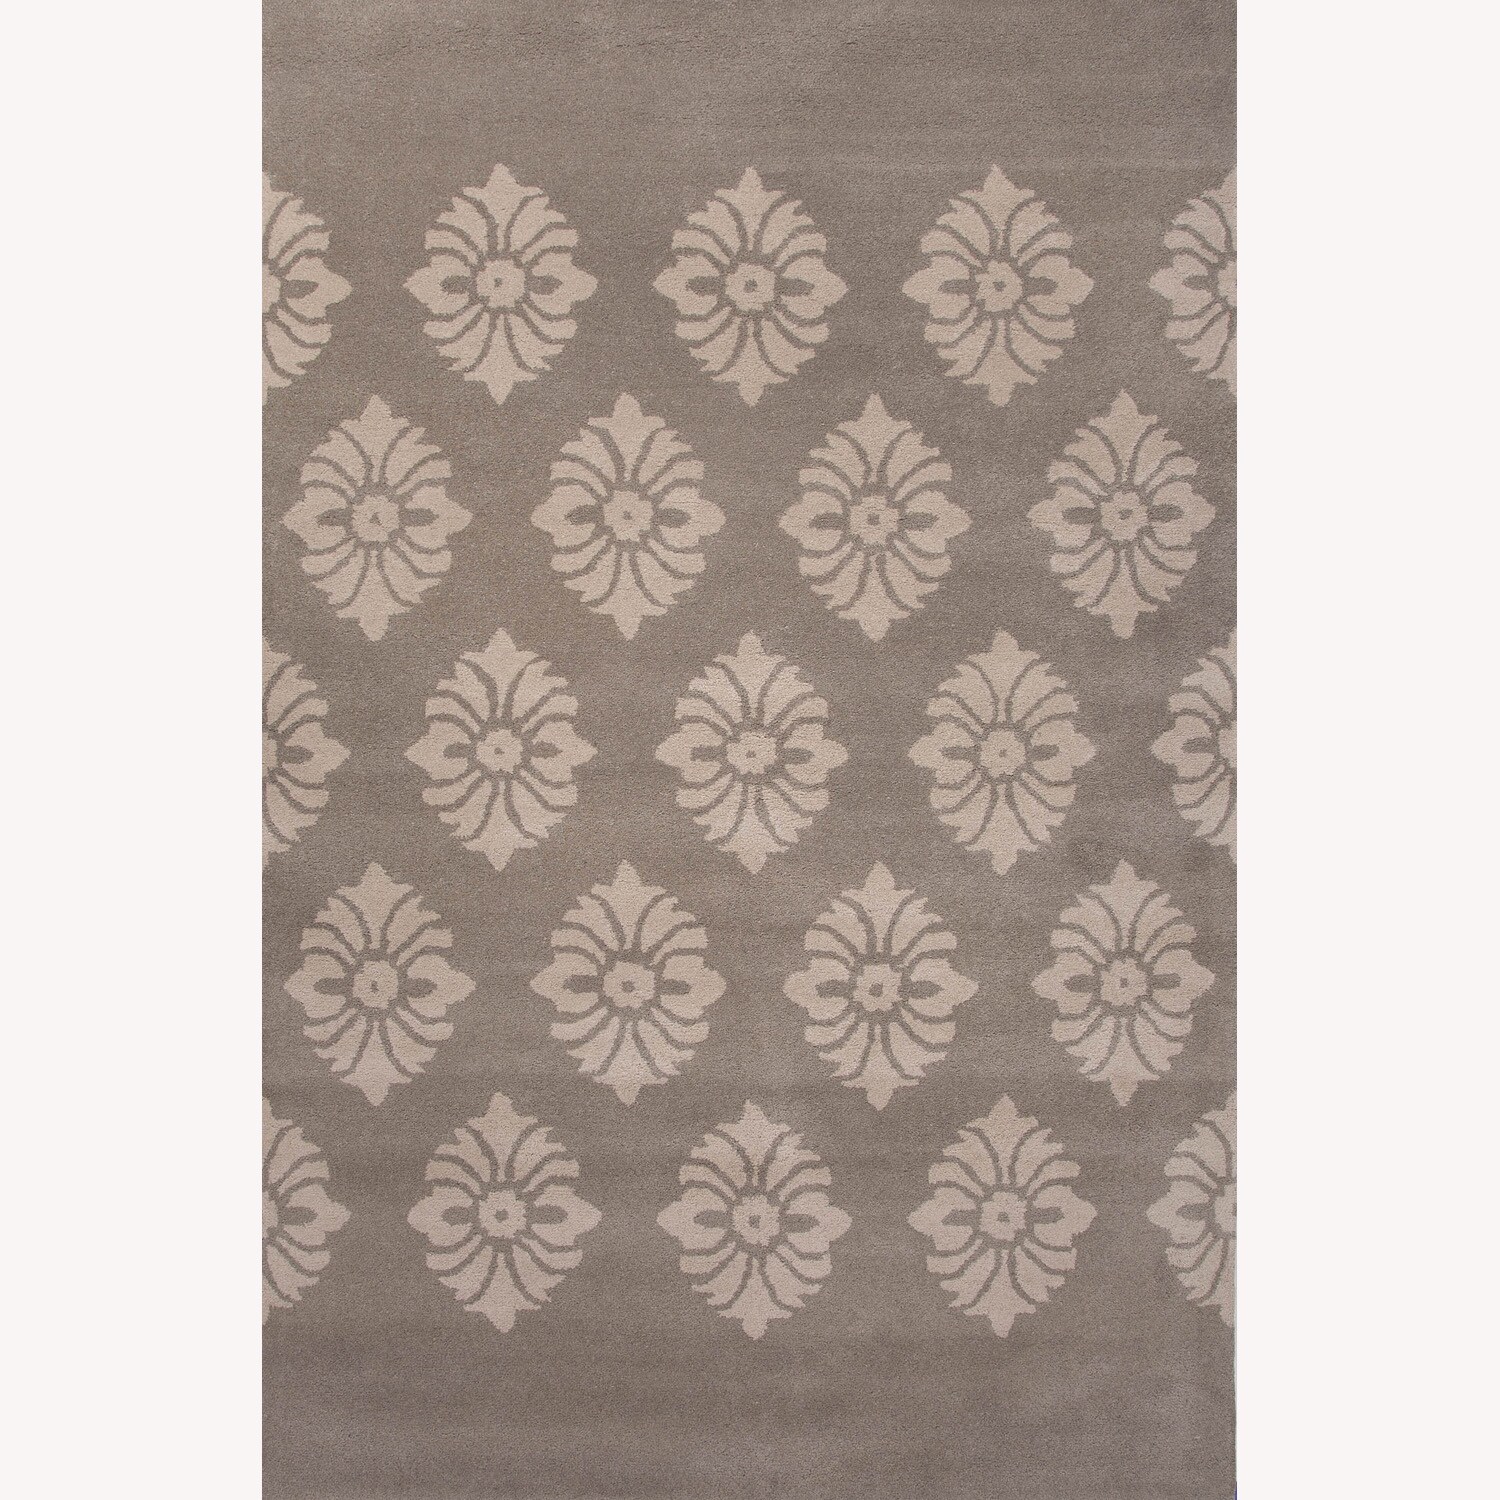 Hand Tufted Holiday Pattern Grey/white Wool Rug (5x8)